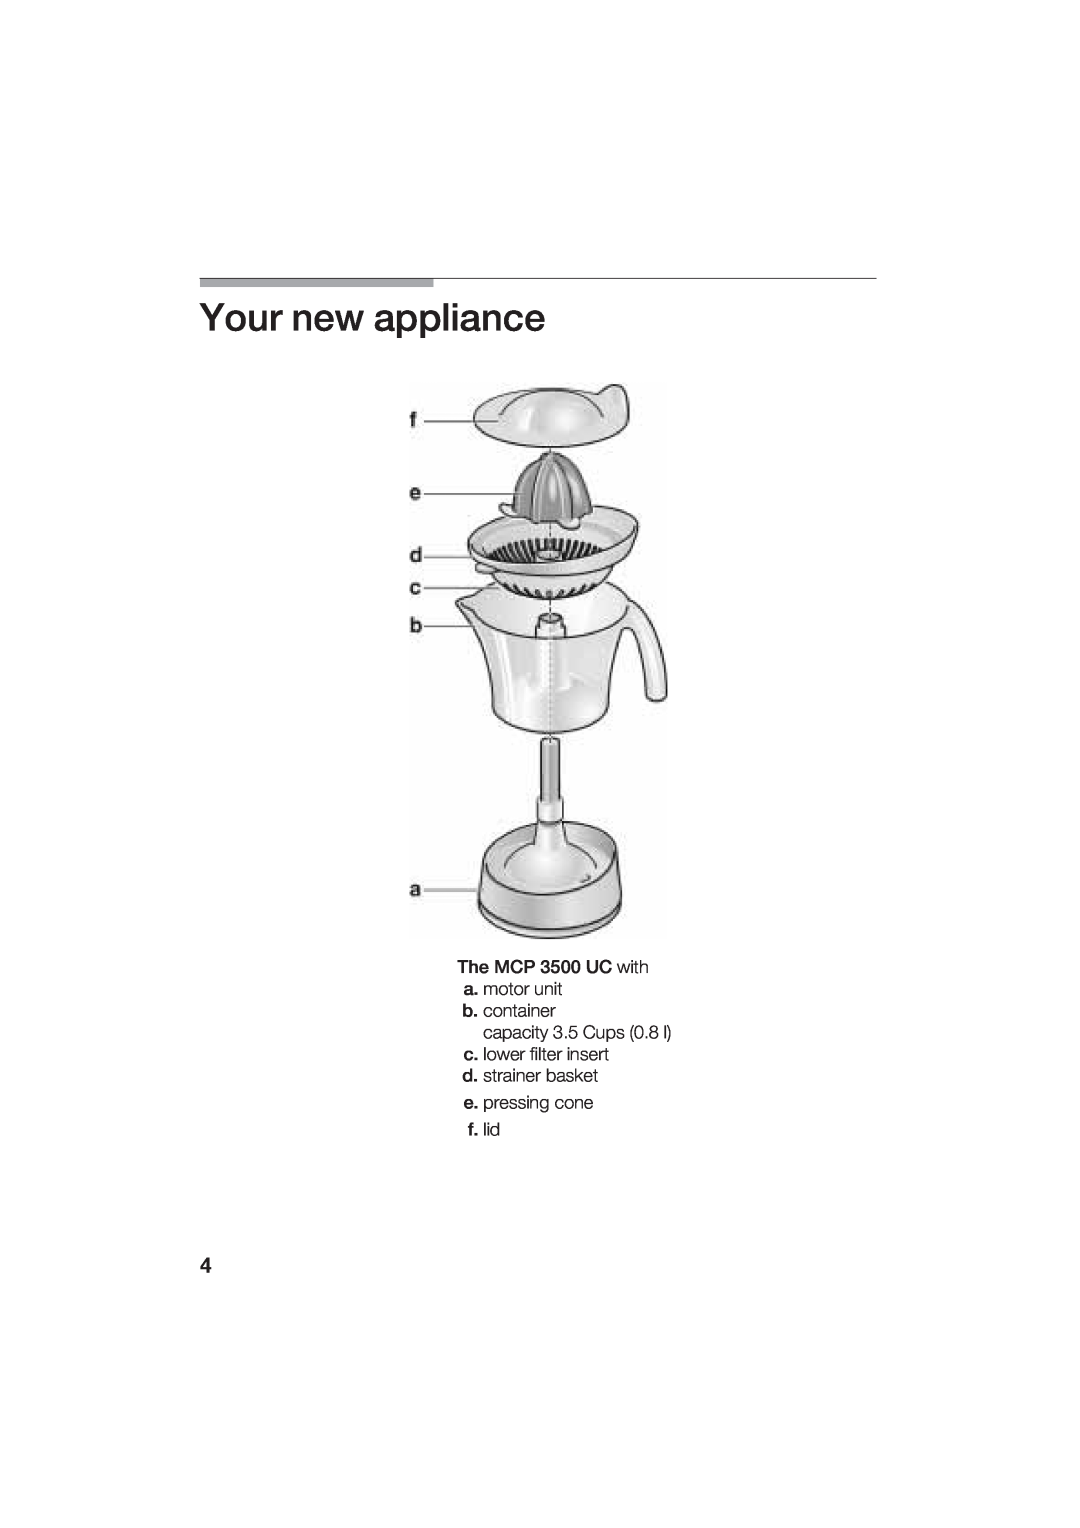 Bosch Appliances MCP 3500 manual Your new appliance, The MCP 5 UCwith a. motor unit b. container 